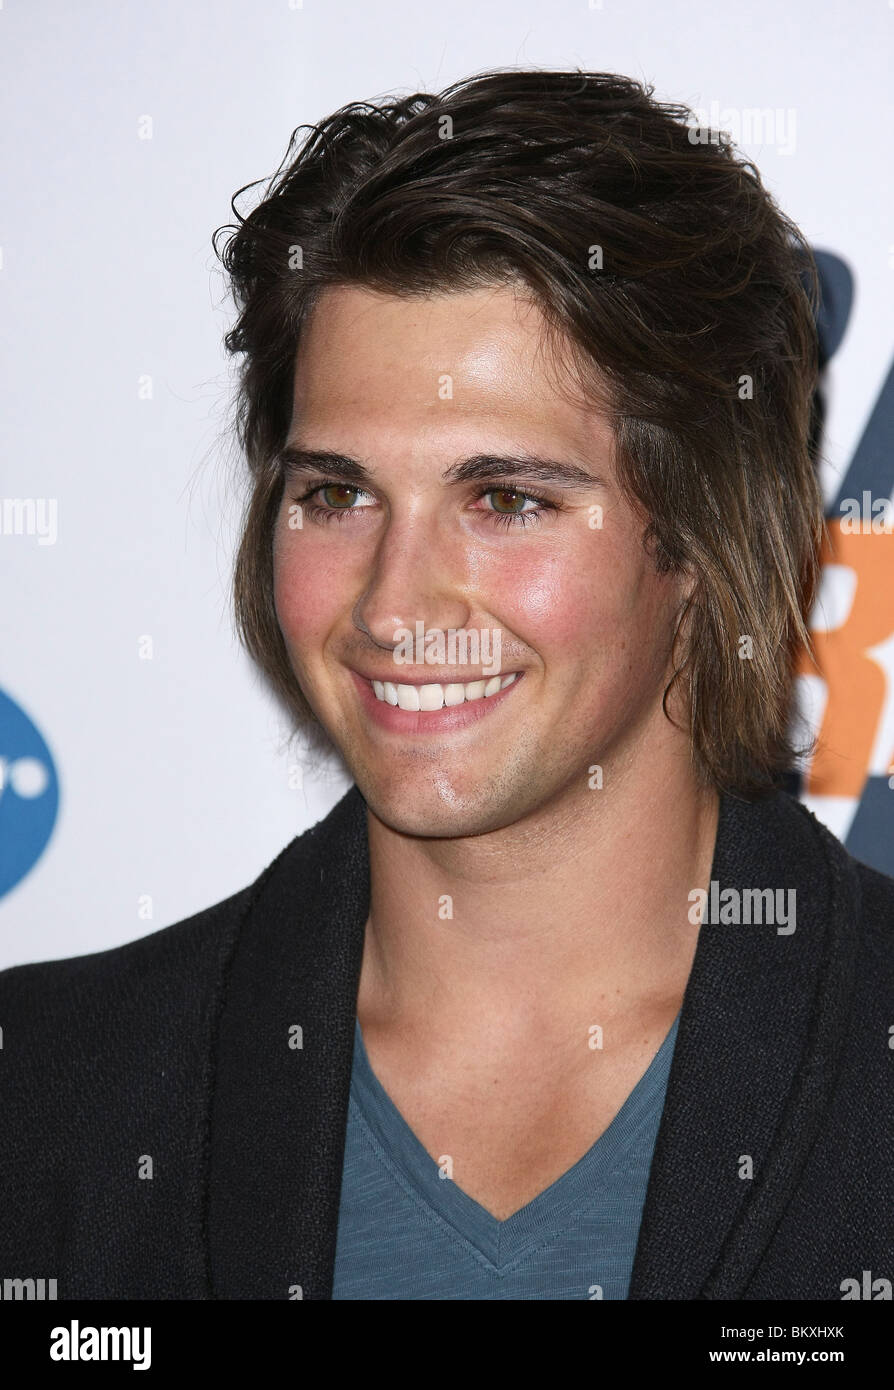 James maslow hi-res stock photography and images - Alamy